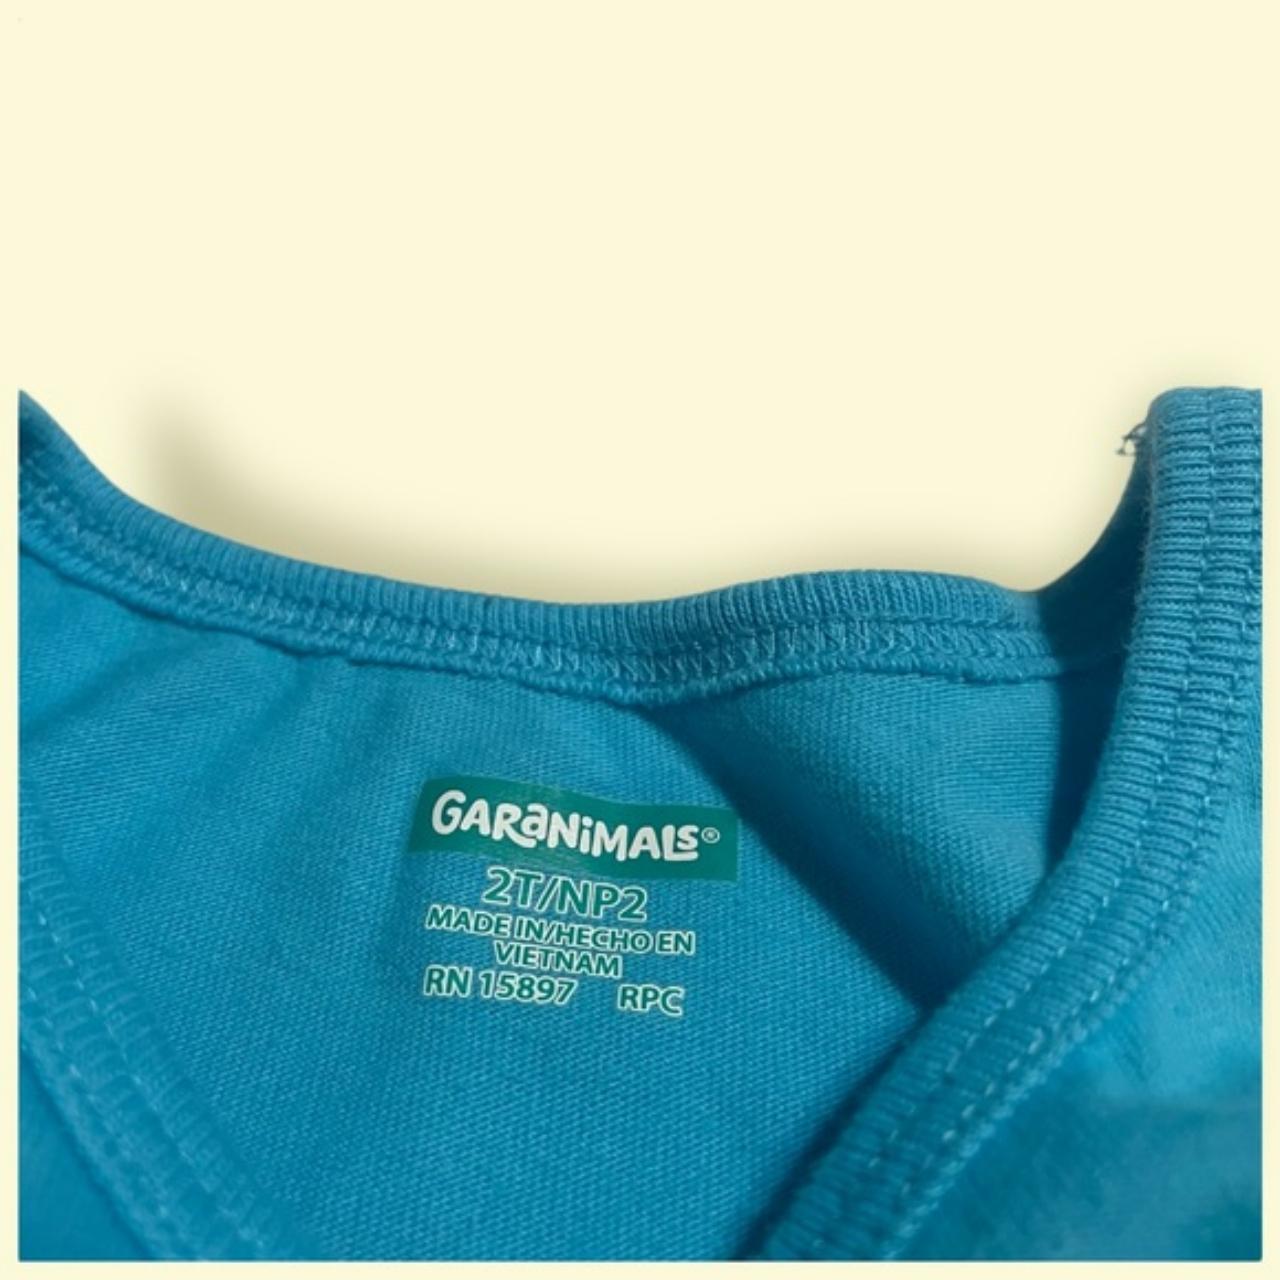 Product Image 3 - Garanimals Tank Top Size 2T

Condition: